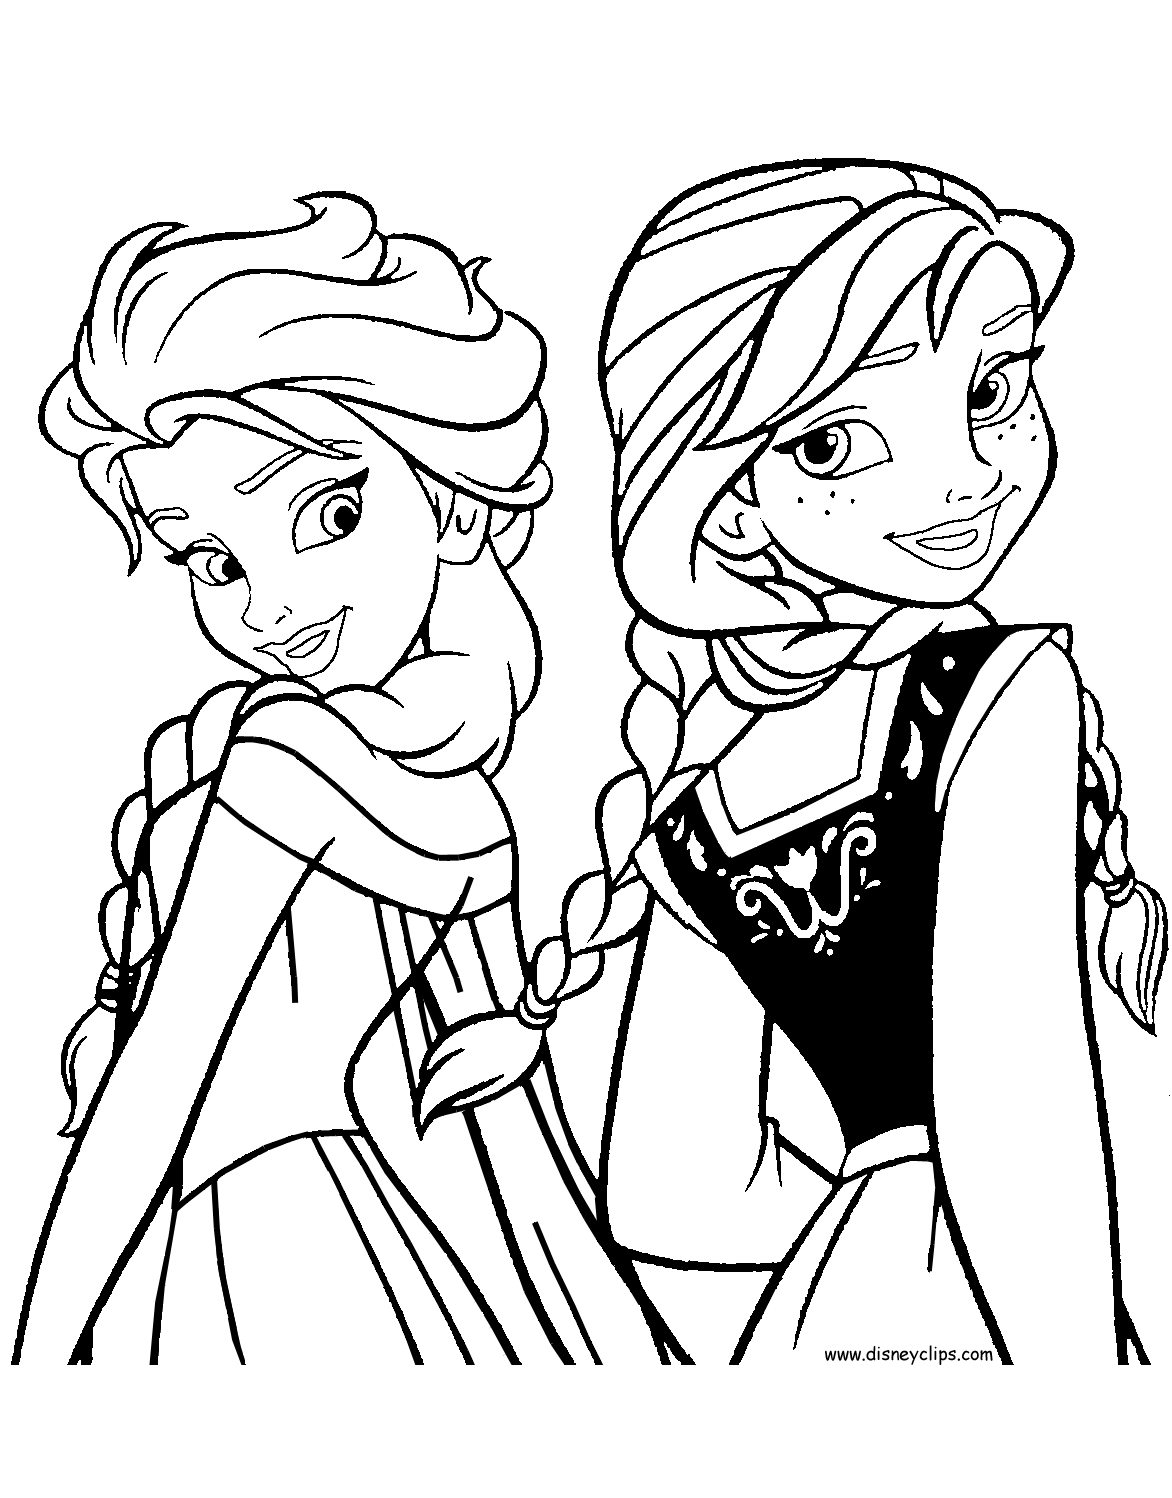 frozen printable colouring pages disney39s frozen coloring pages 2 disneyclipscom frozen printable pages colouring 